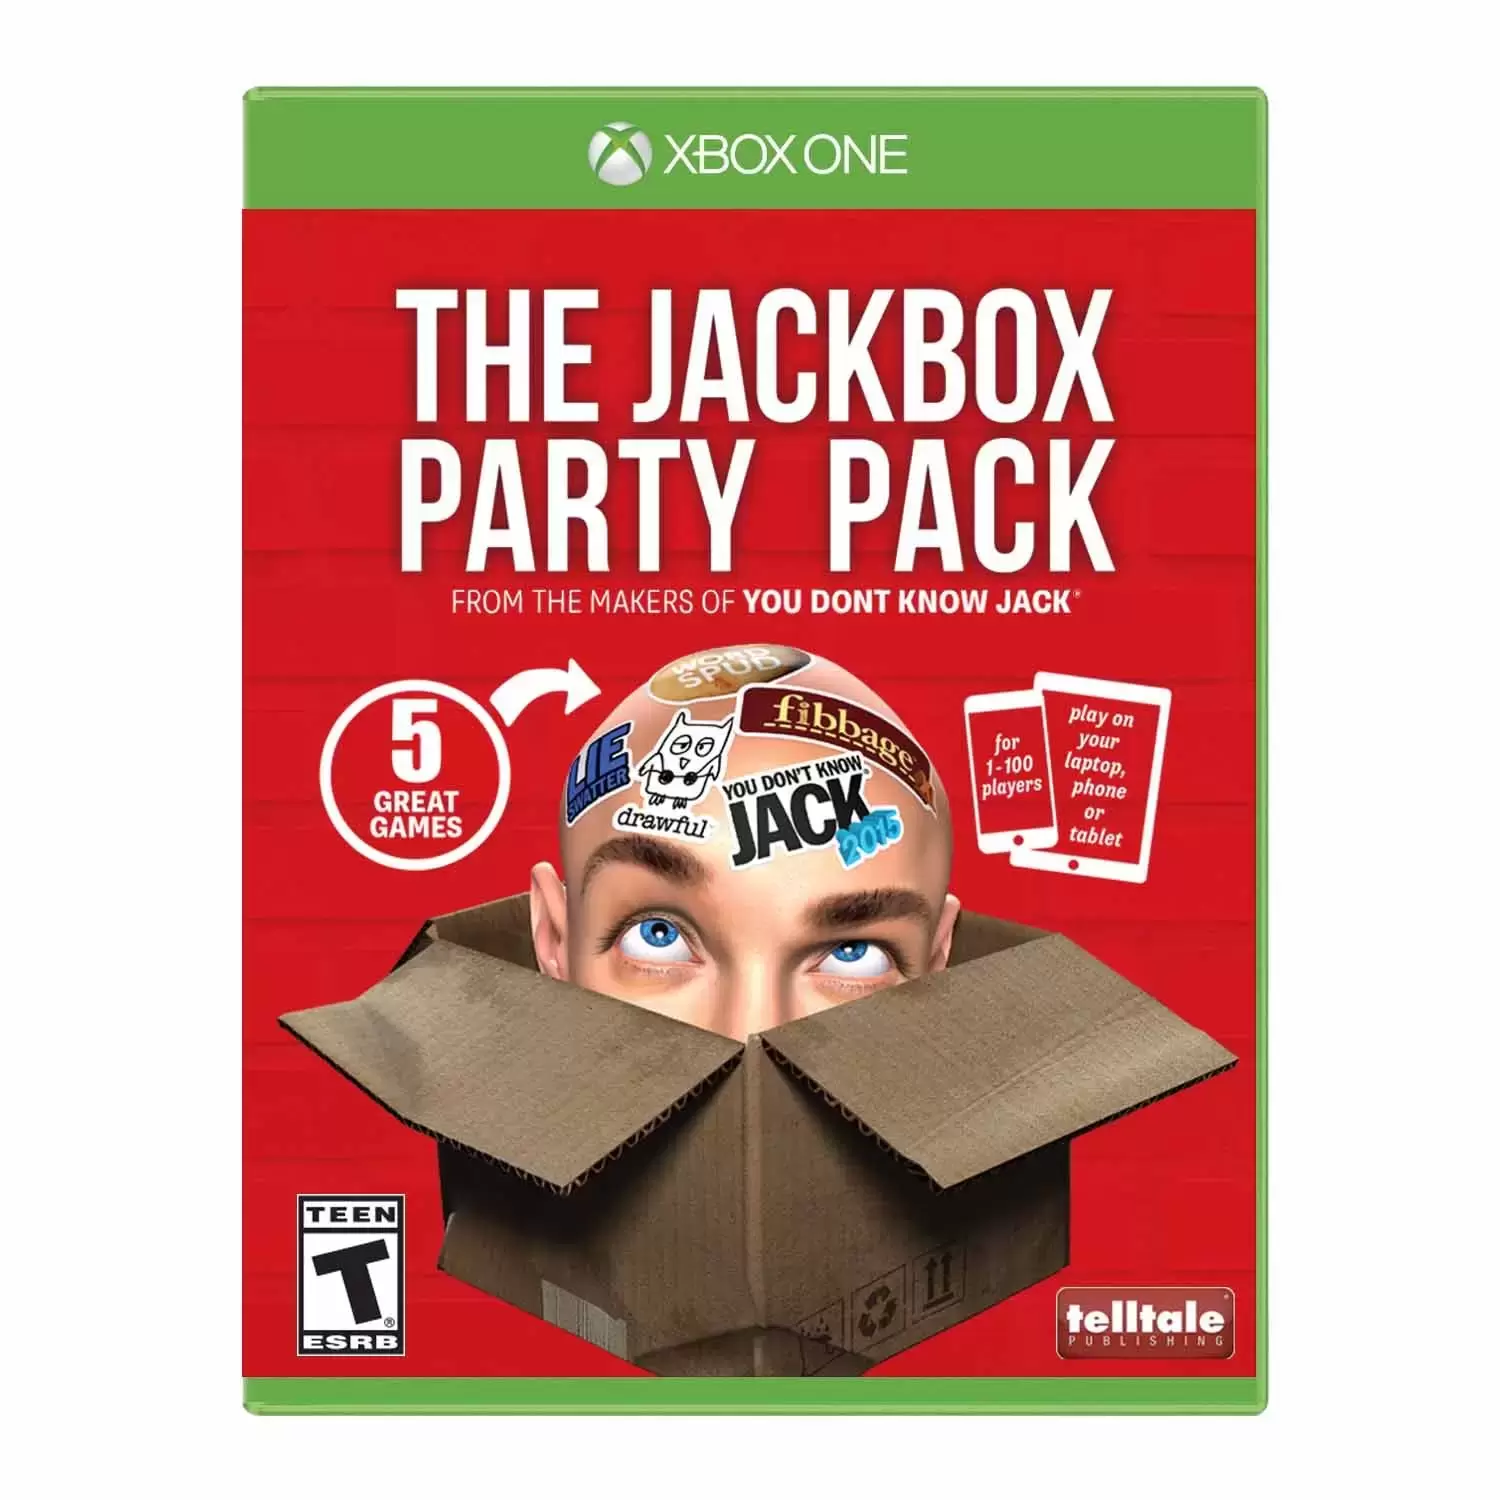 XBOX One Games - The Jackbox Party Pack